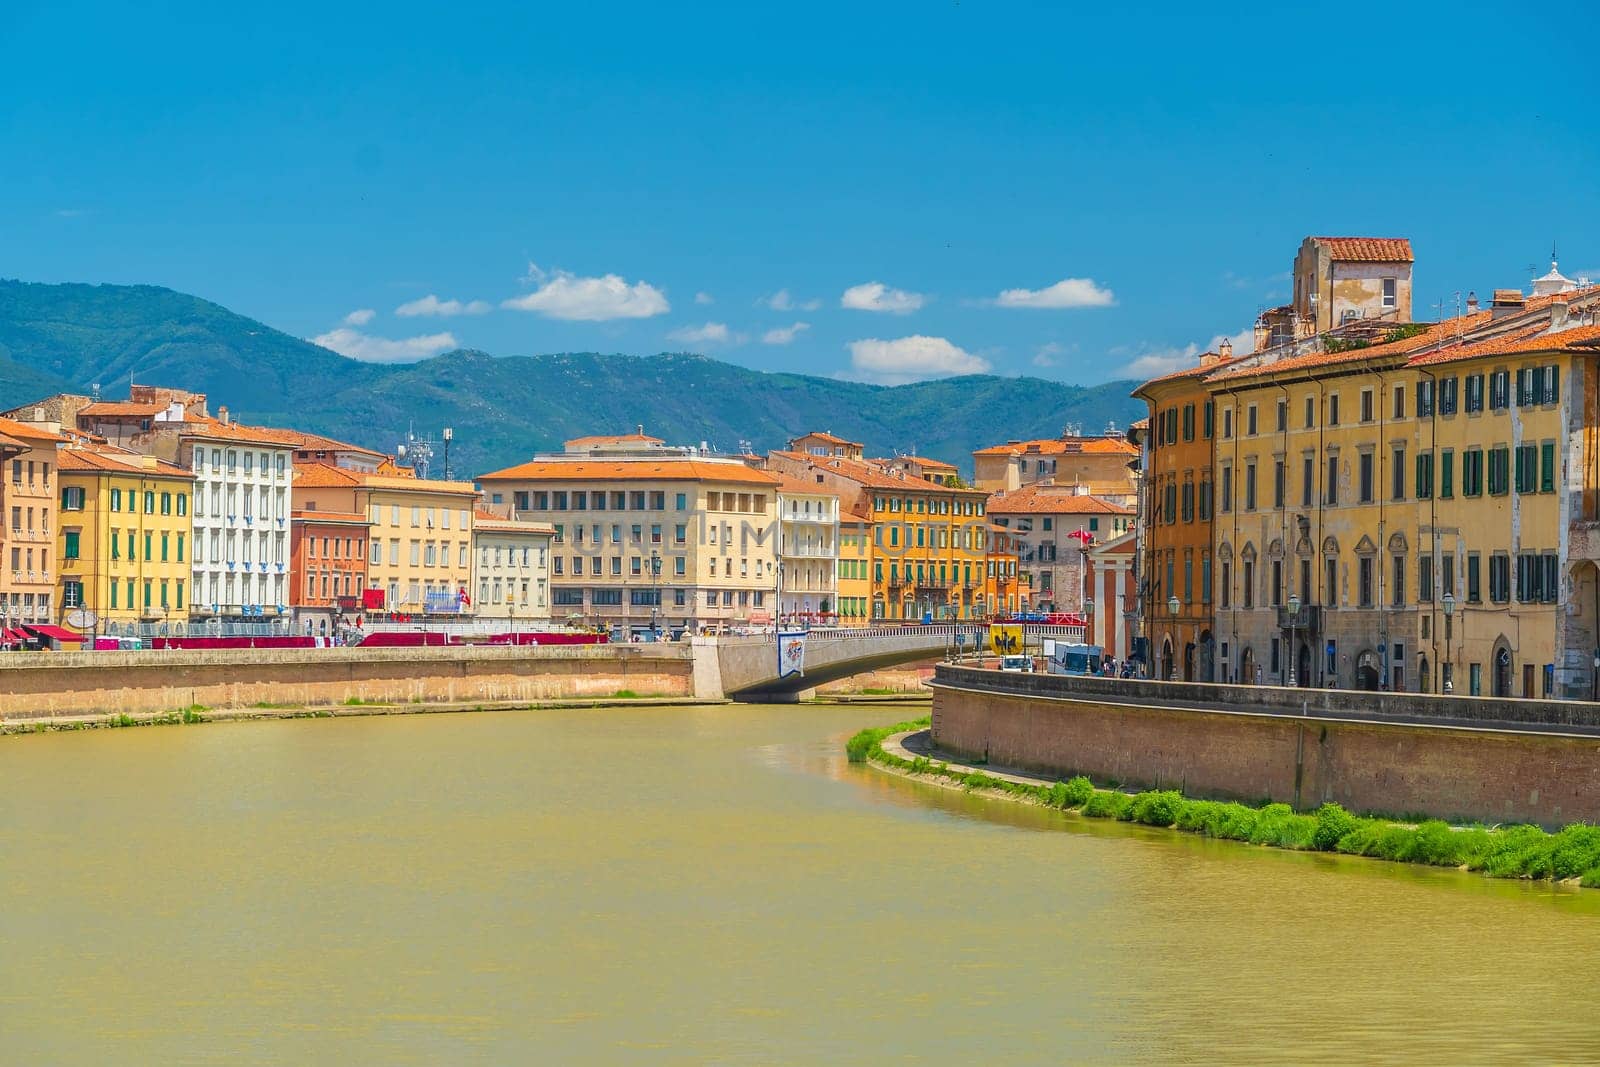 View of the medieval town of Pisa and river Arno  by f11photo